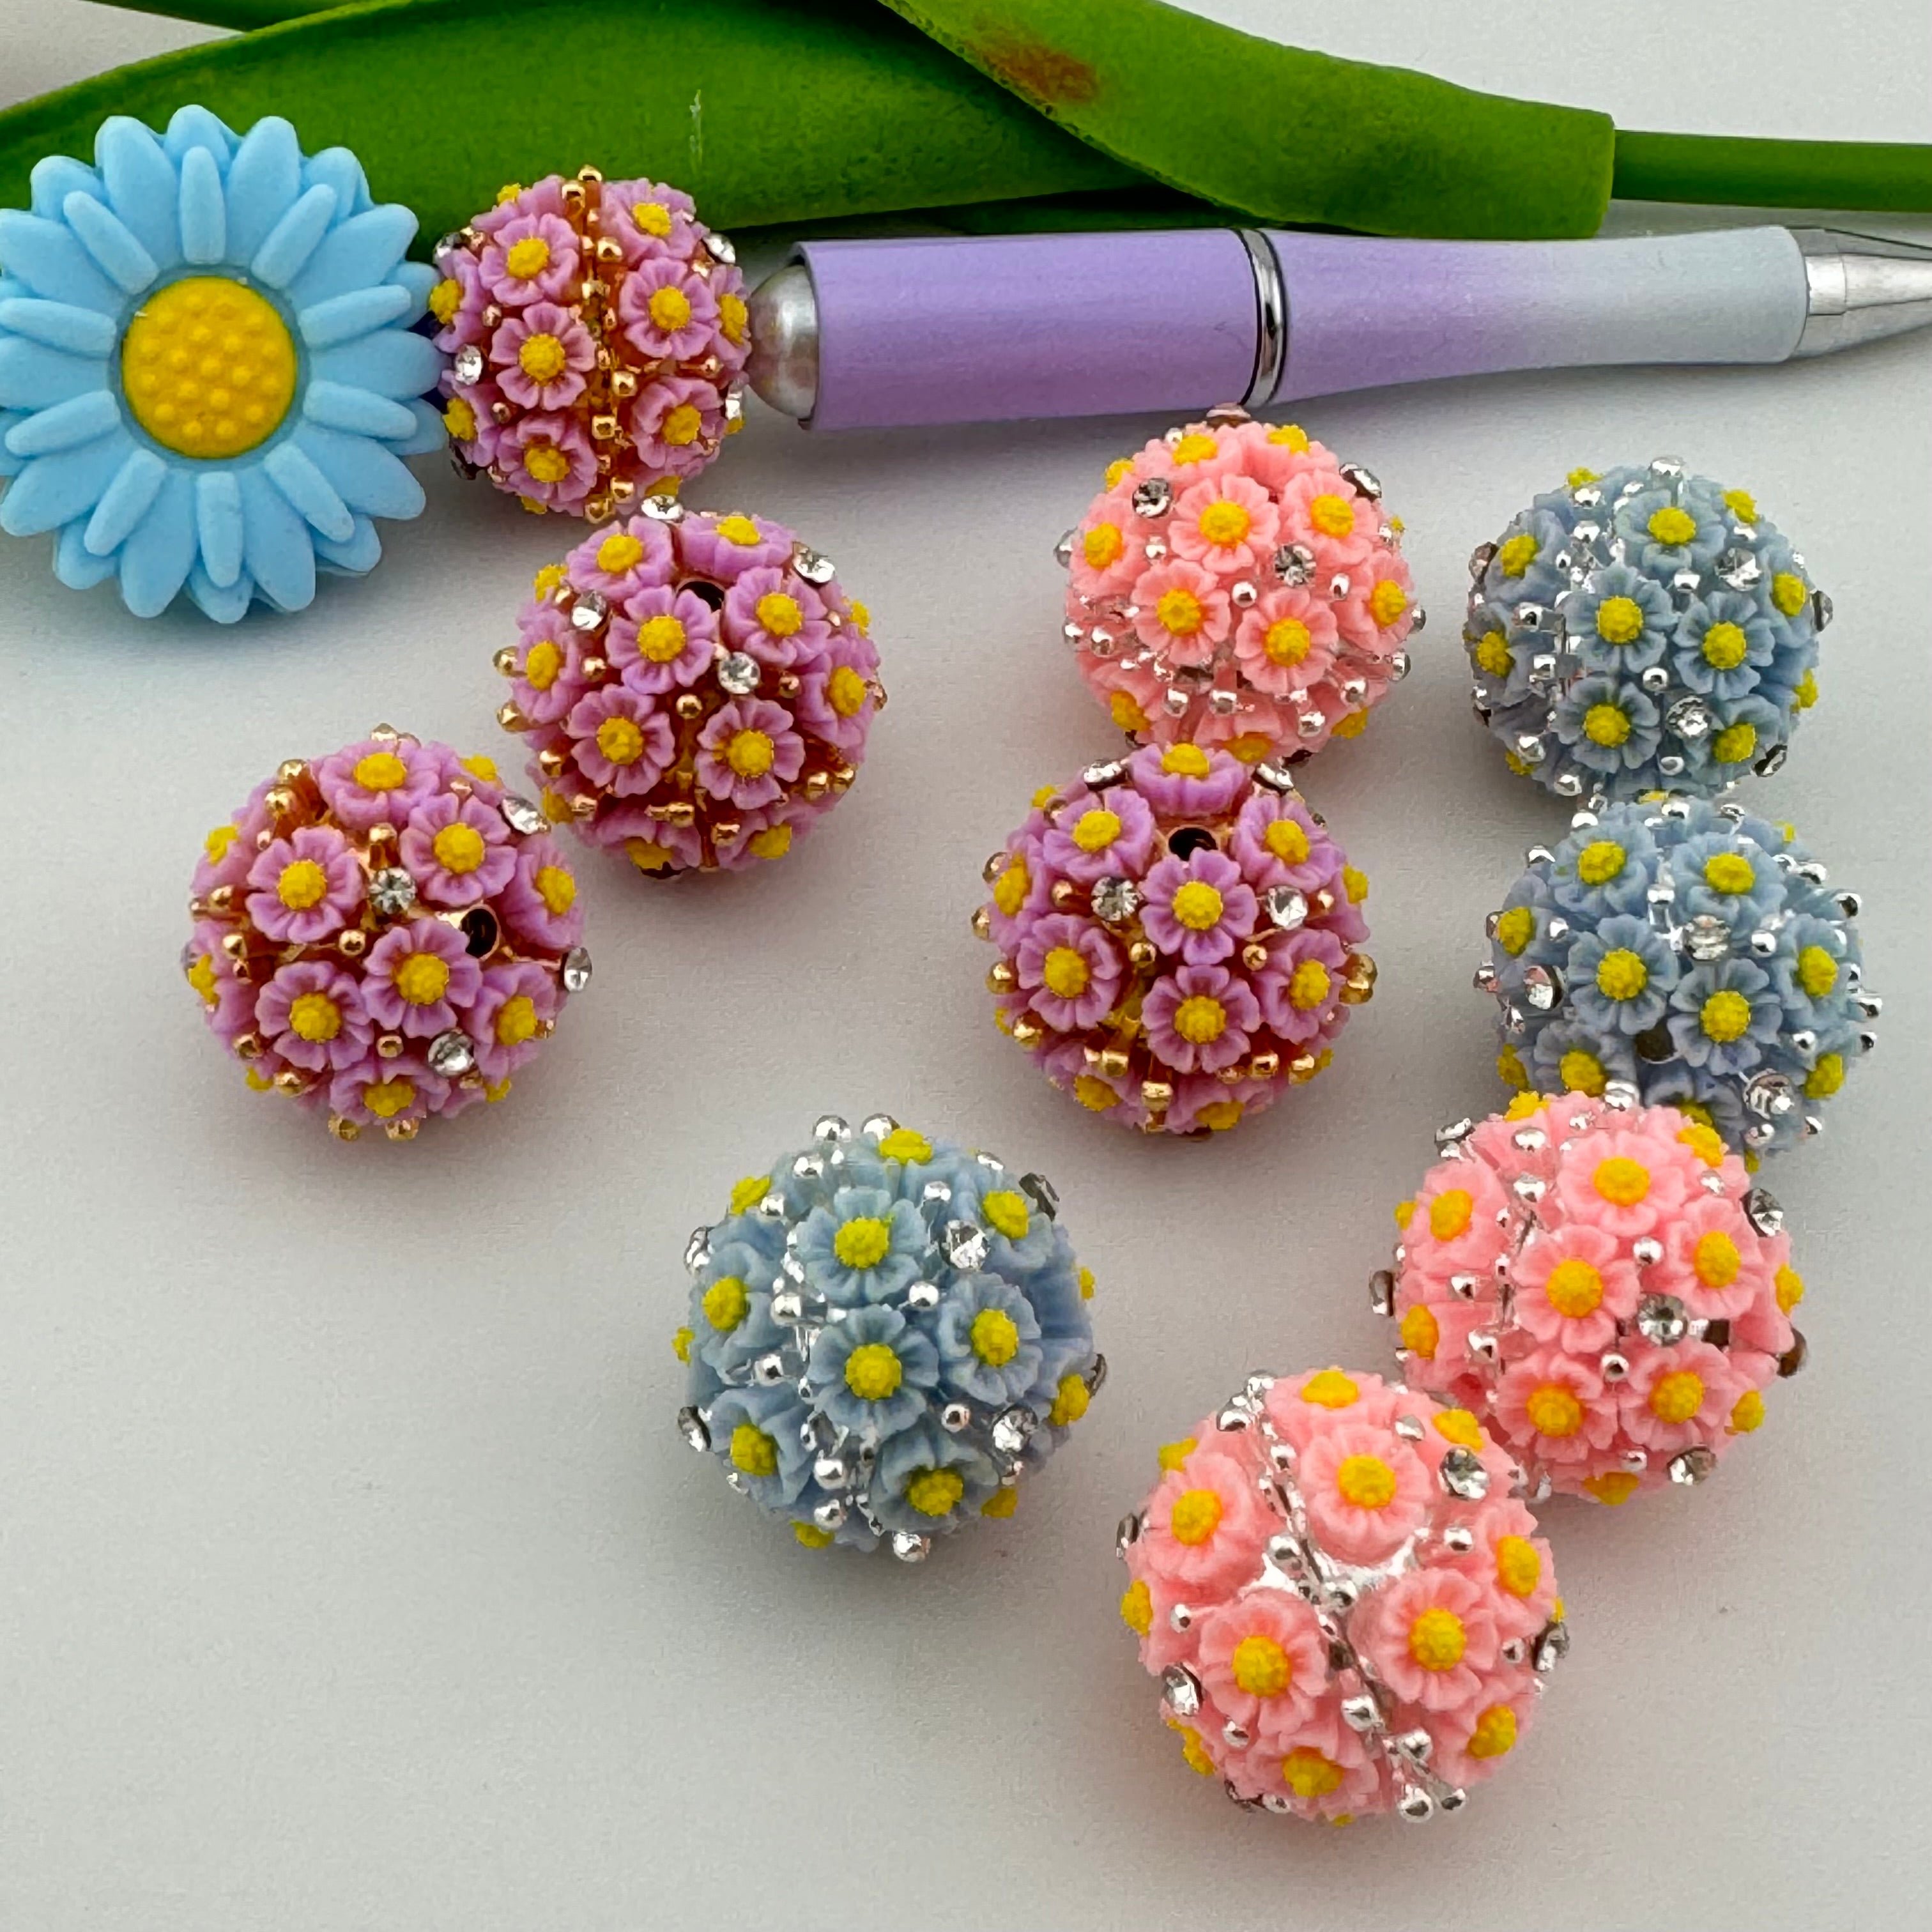 20 Pieces 20mm Mixed Color Flower Sparkling Beads